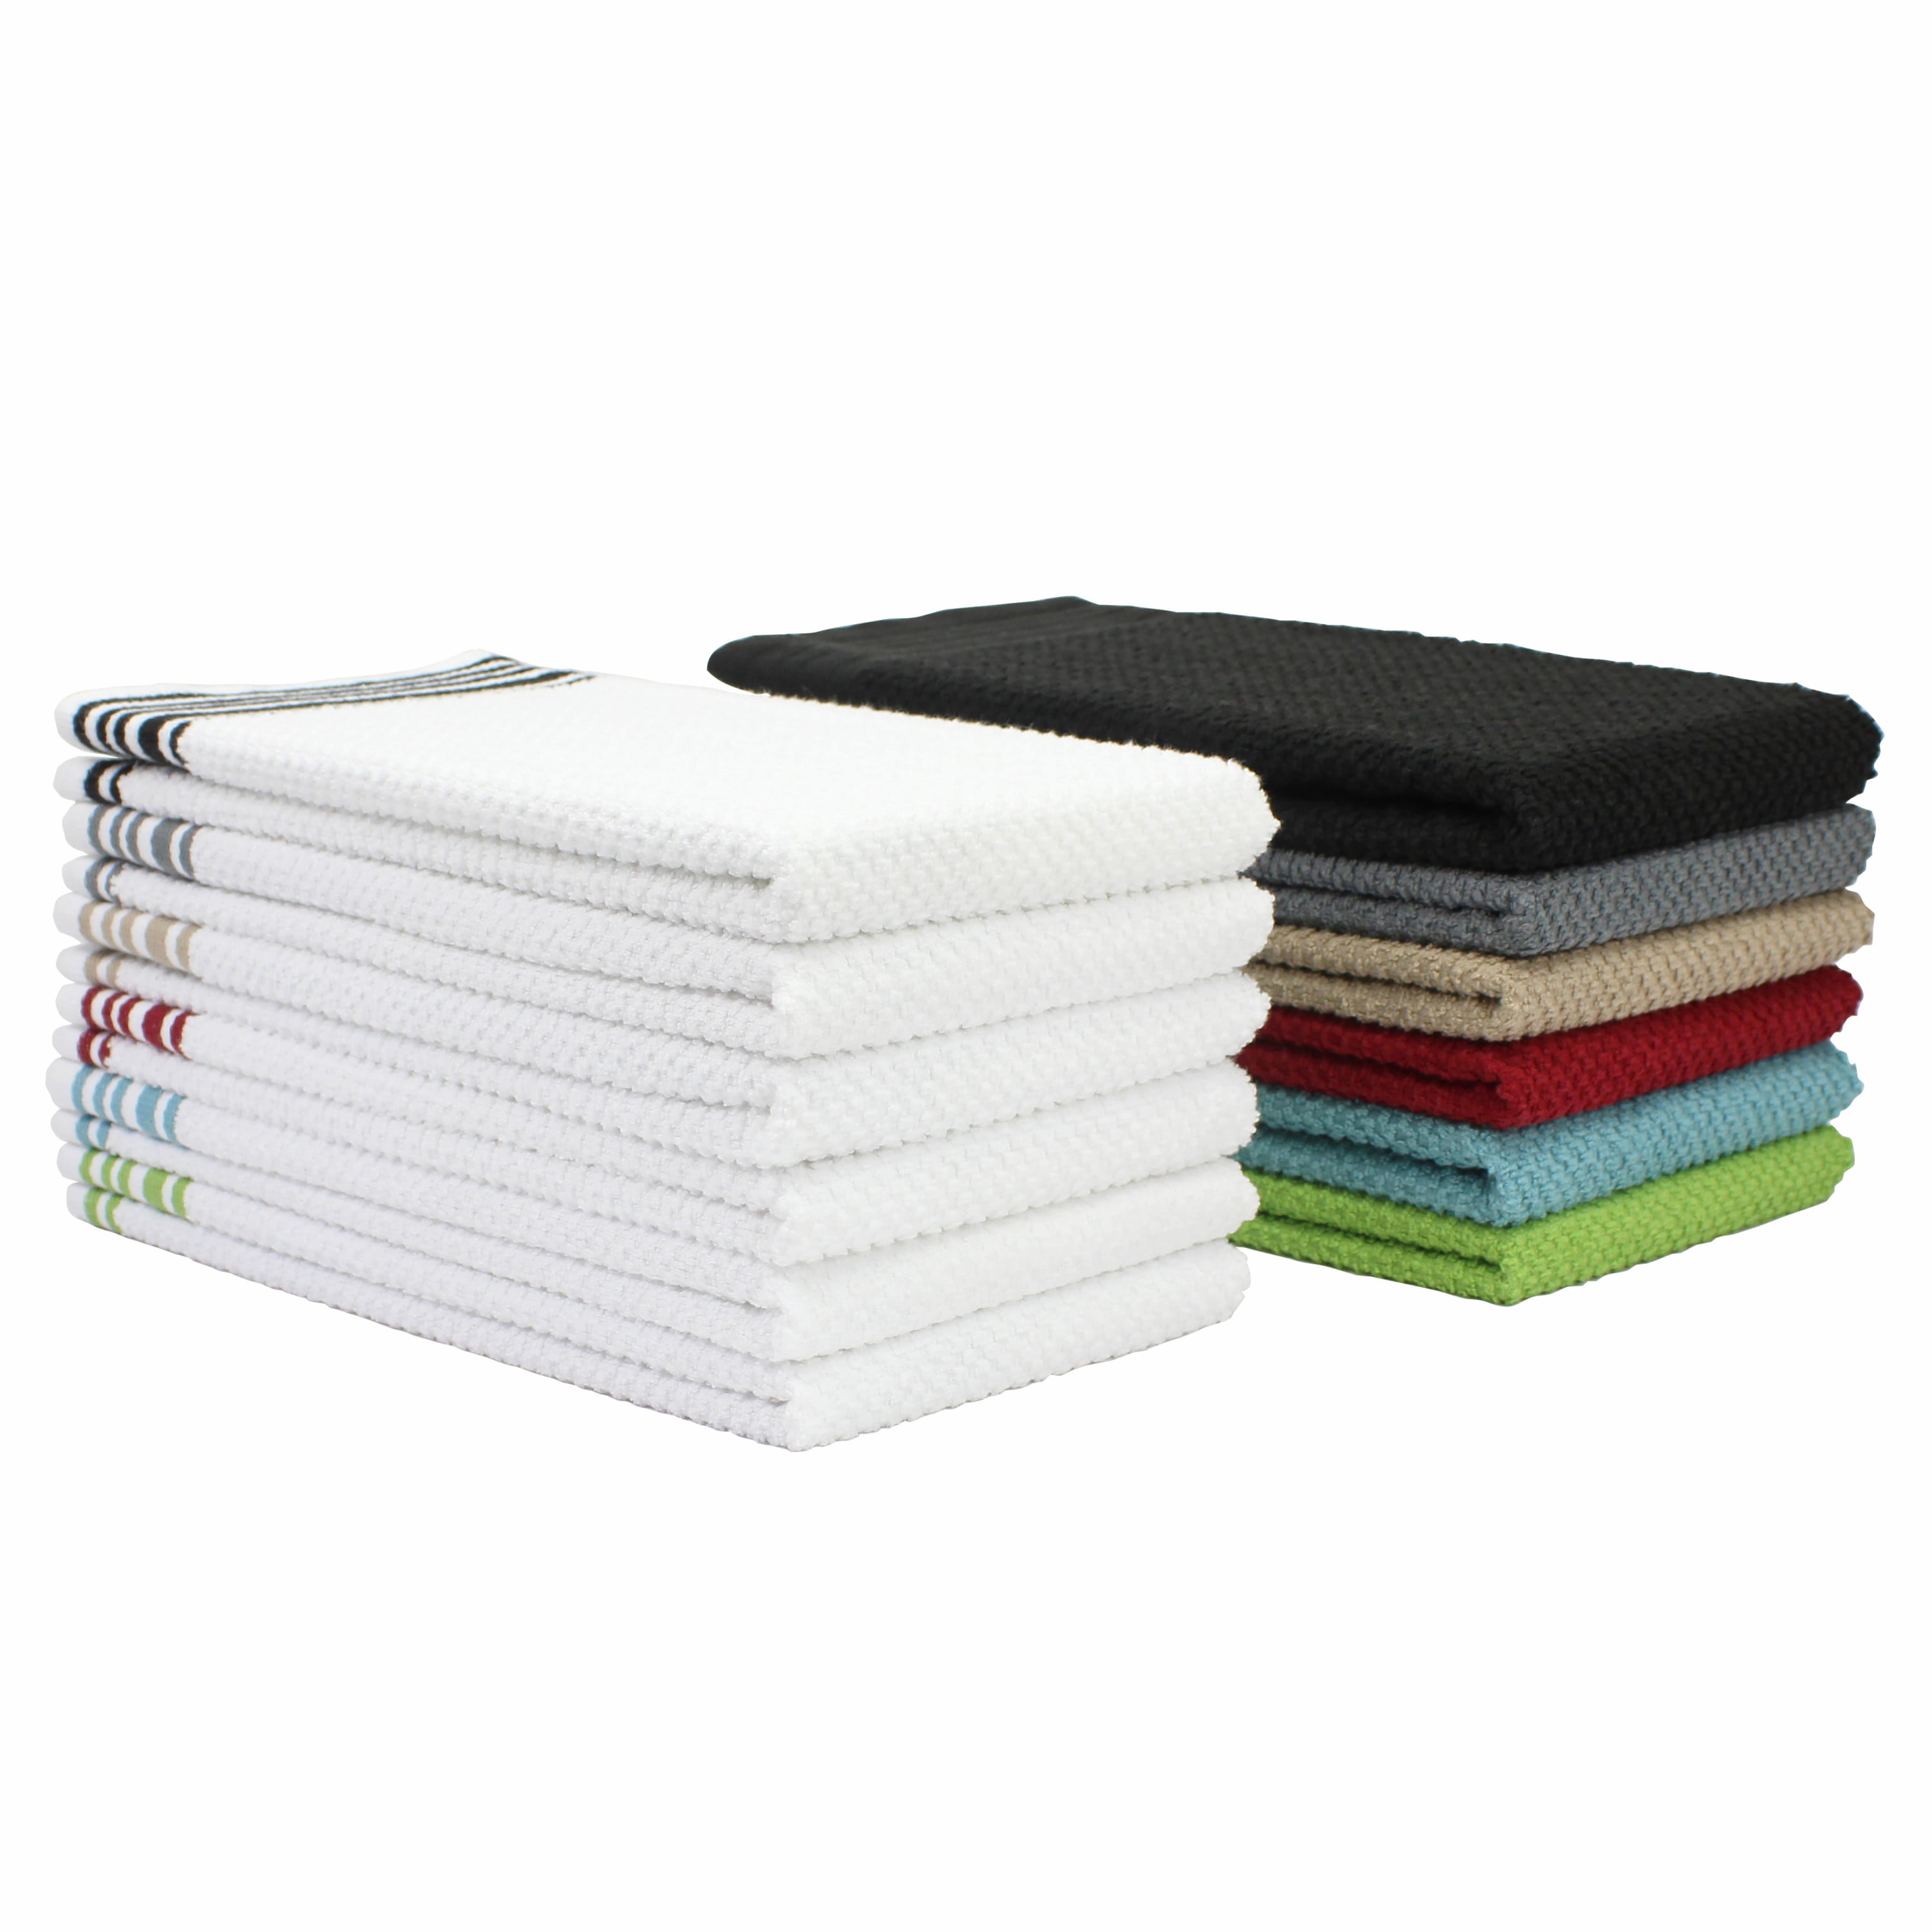 Mainstays, 10 Pack, Terry Kitchen Towel Set, Assorted Solid Colors